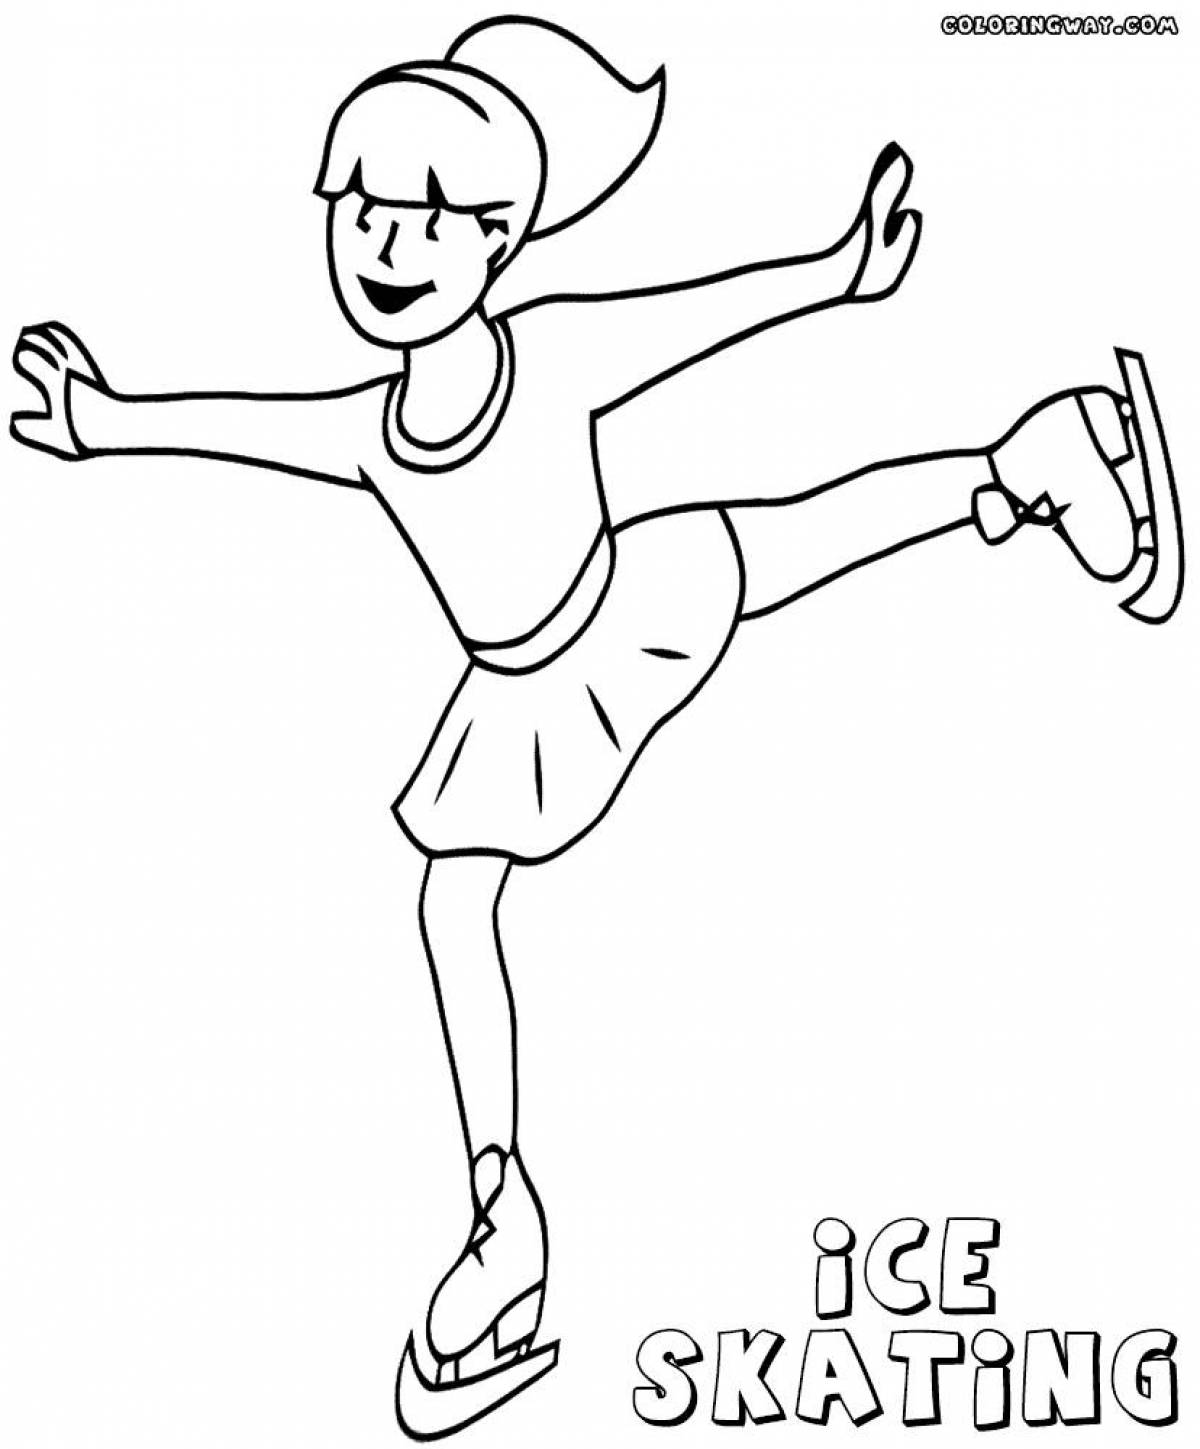 Dynamic figure skating coloring page